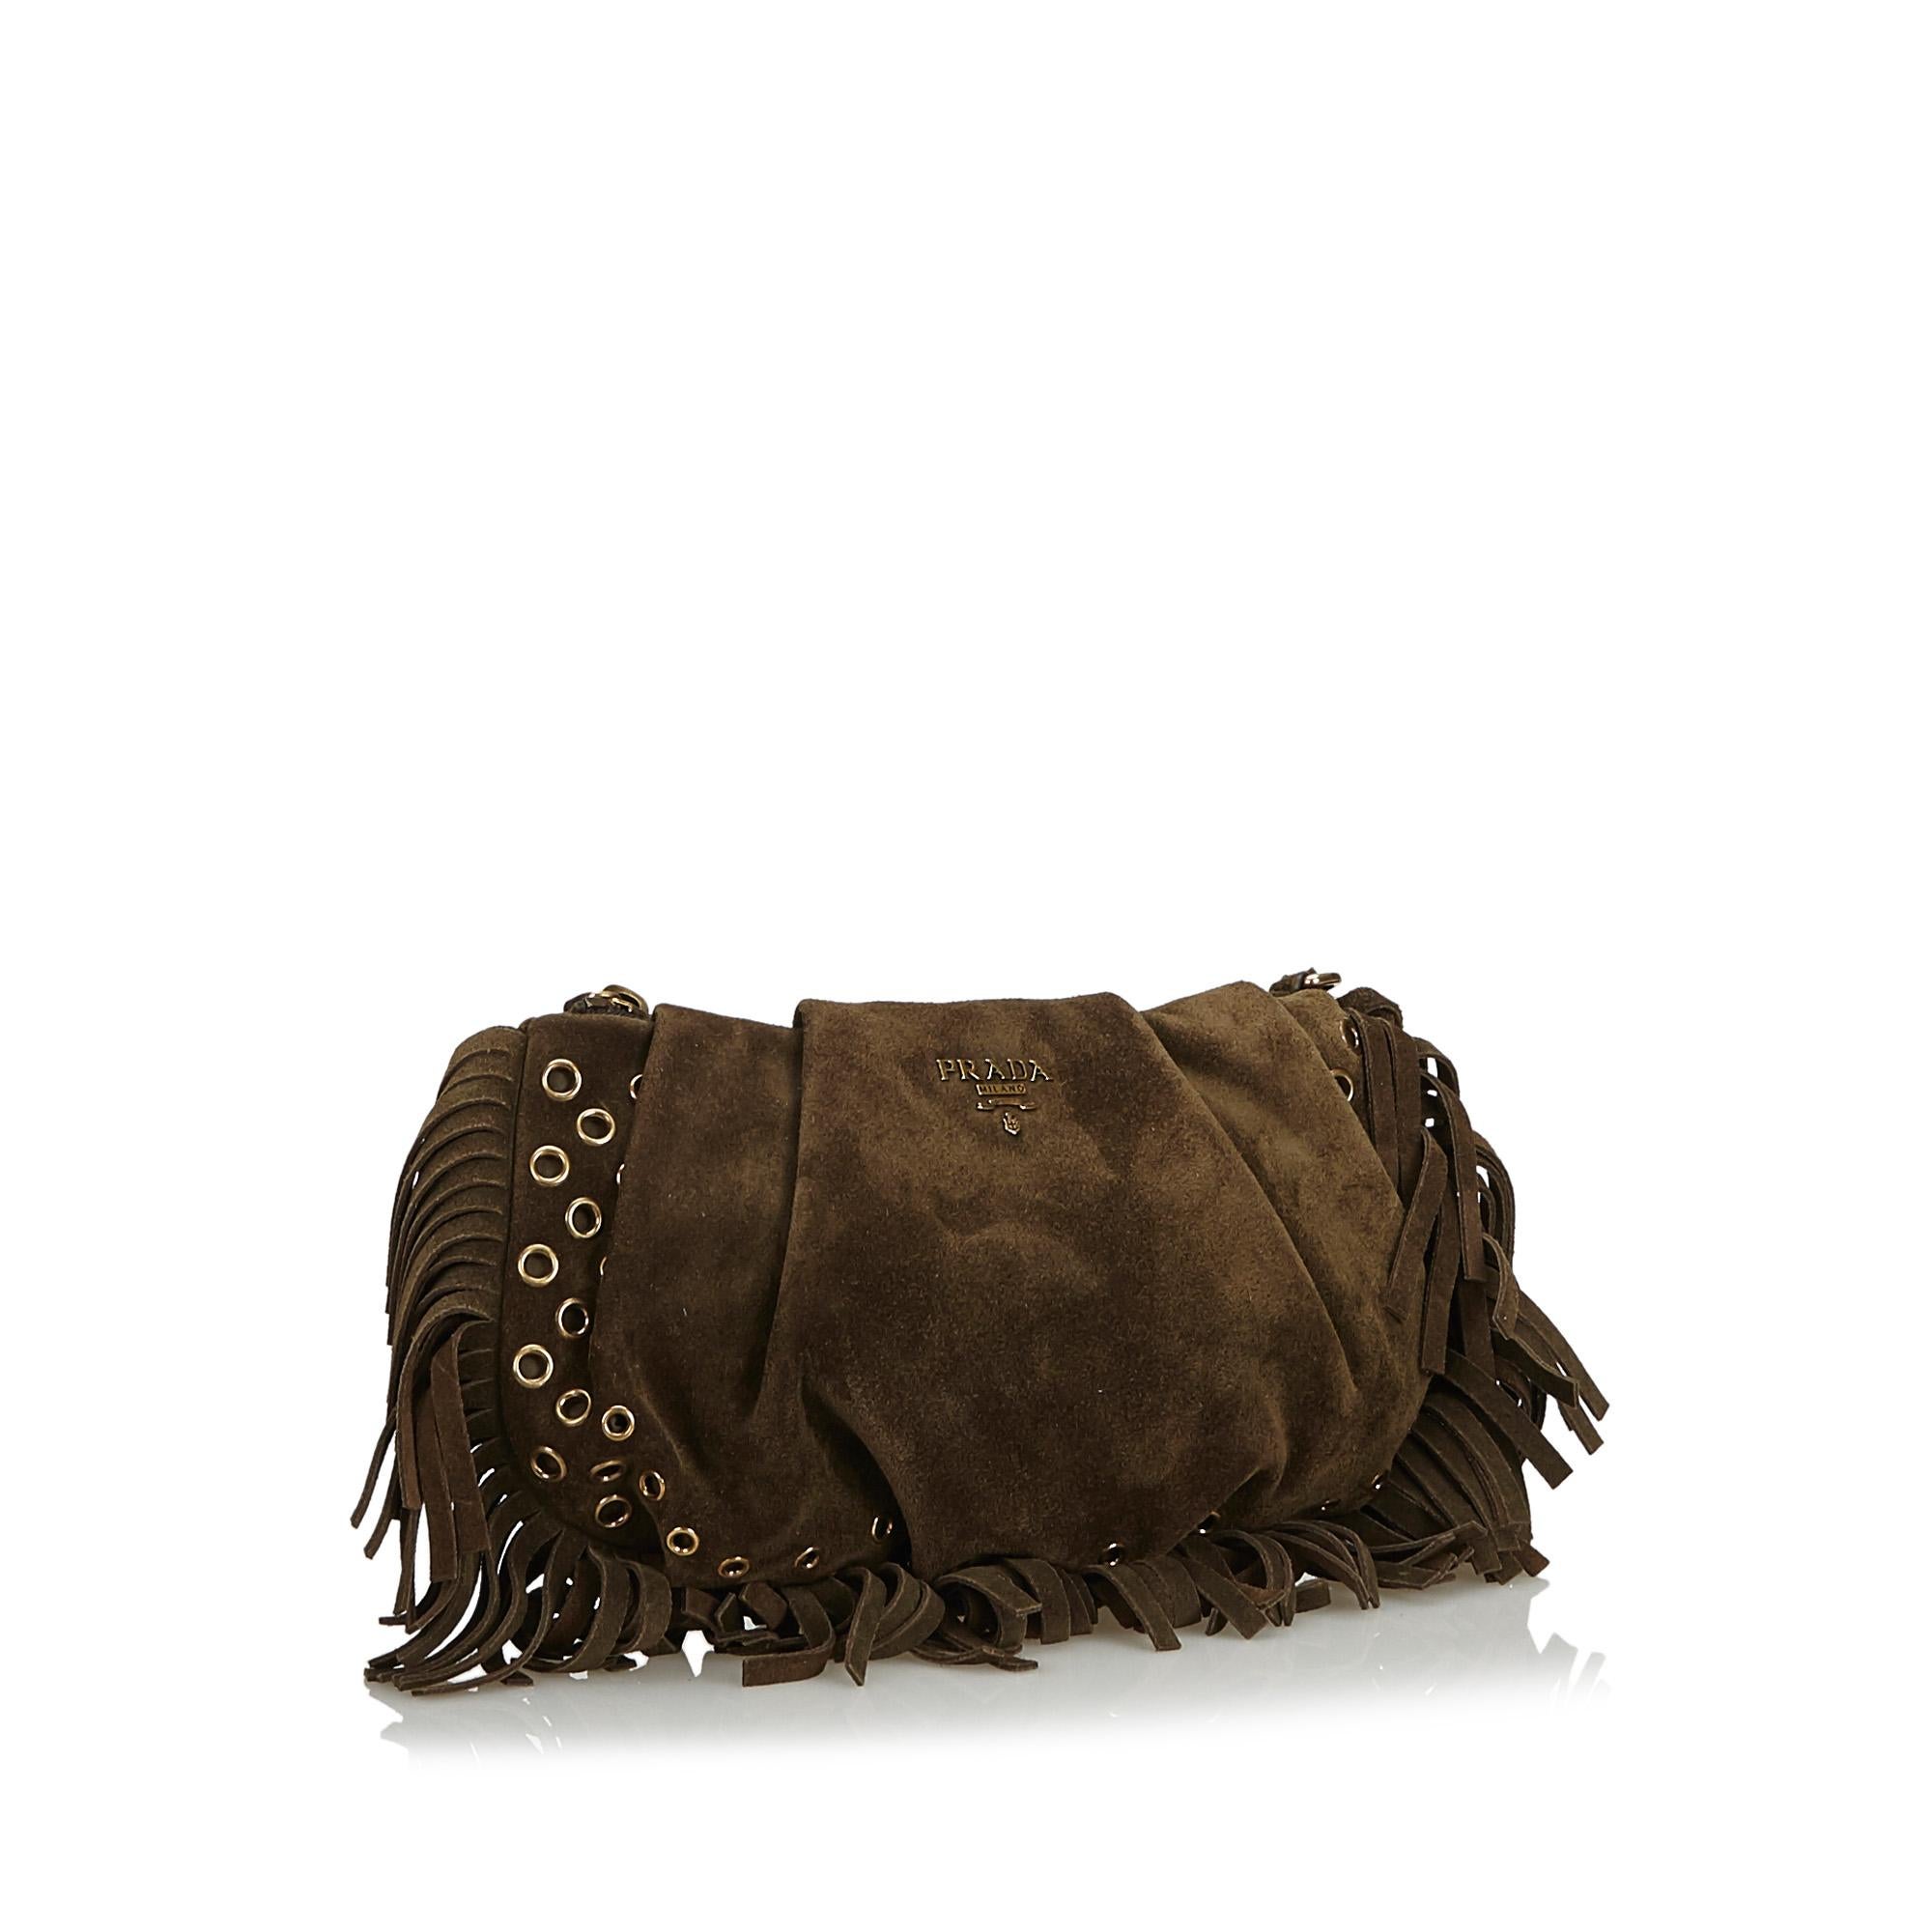 This clutch bag features a suede body with metal accents and fringe details, a top zip closure, and an interior zip pocket. It carries as B+ condition rating.

Inclusions: 
Box
Authenticity Card

Dimensions:
Length: 14.00 cm
Width: 24.00 cm
Depth: